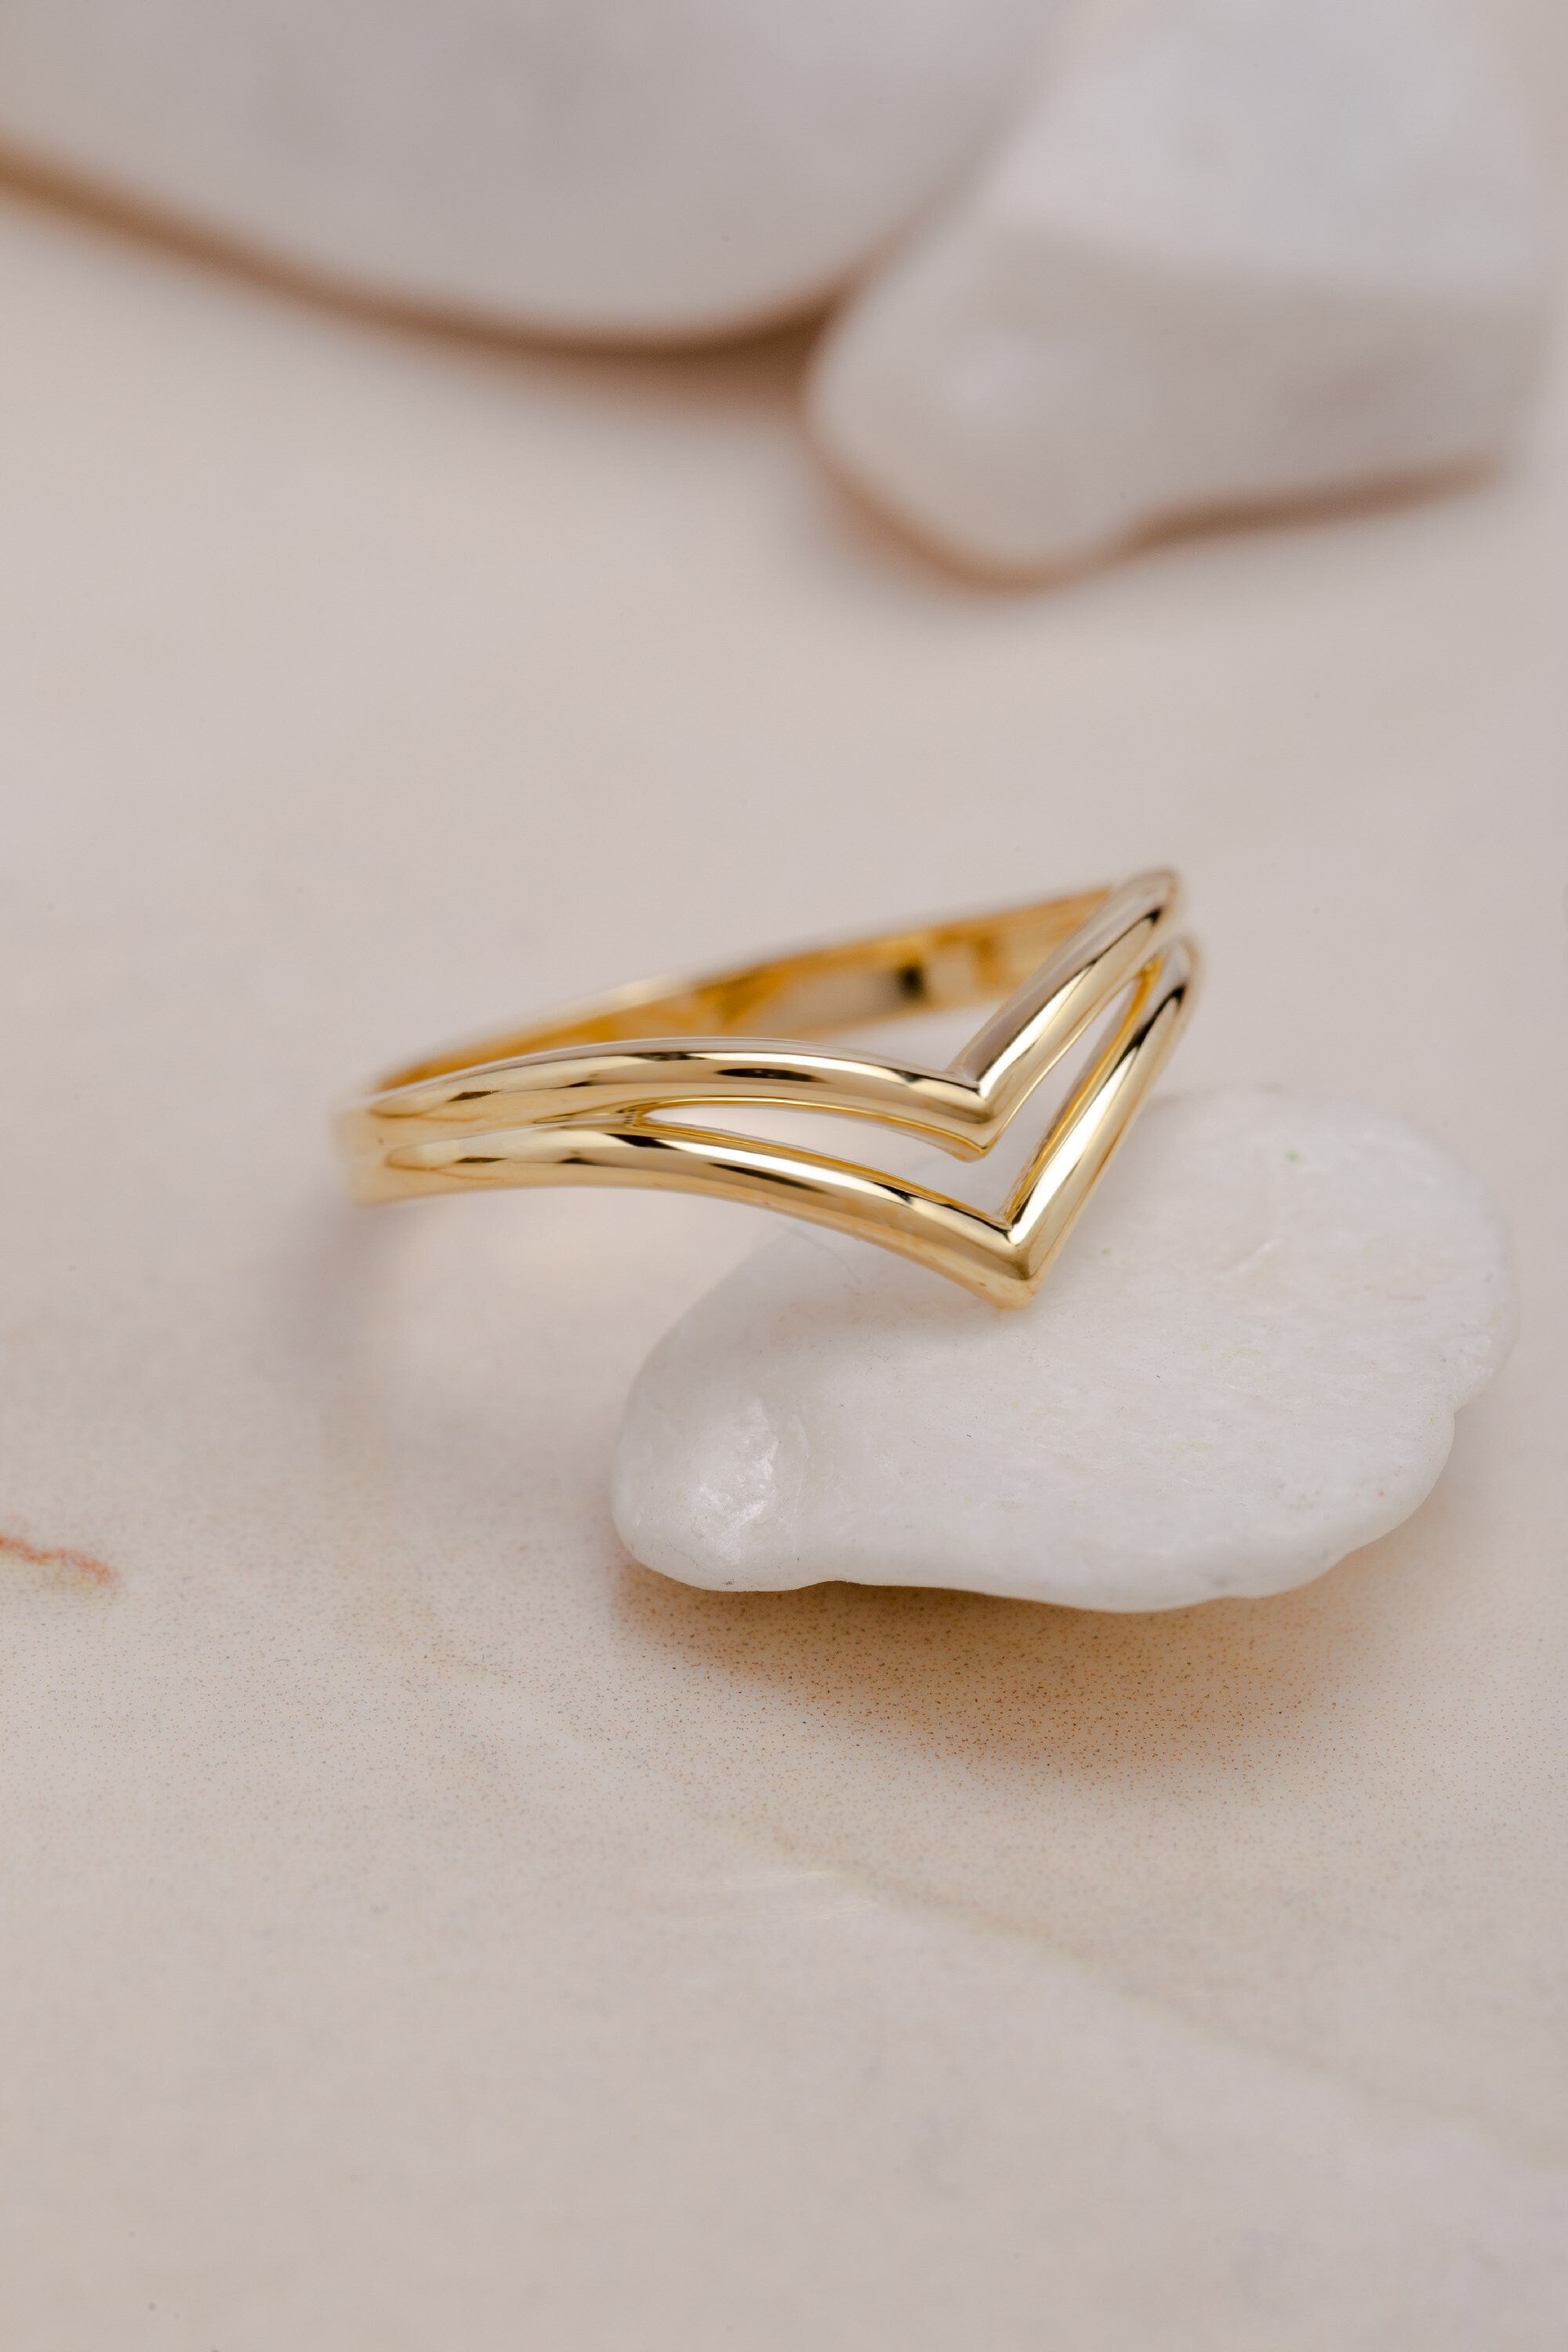 10K V Shape Ring, Yellow Gold Ring, Curve Thumb Ring, Chevron Ring, Stacking Ring, White Gold Promise Ring, Gift For Mother Day